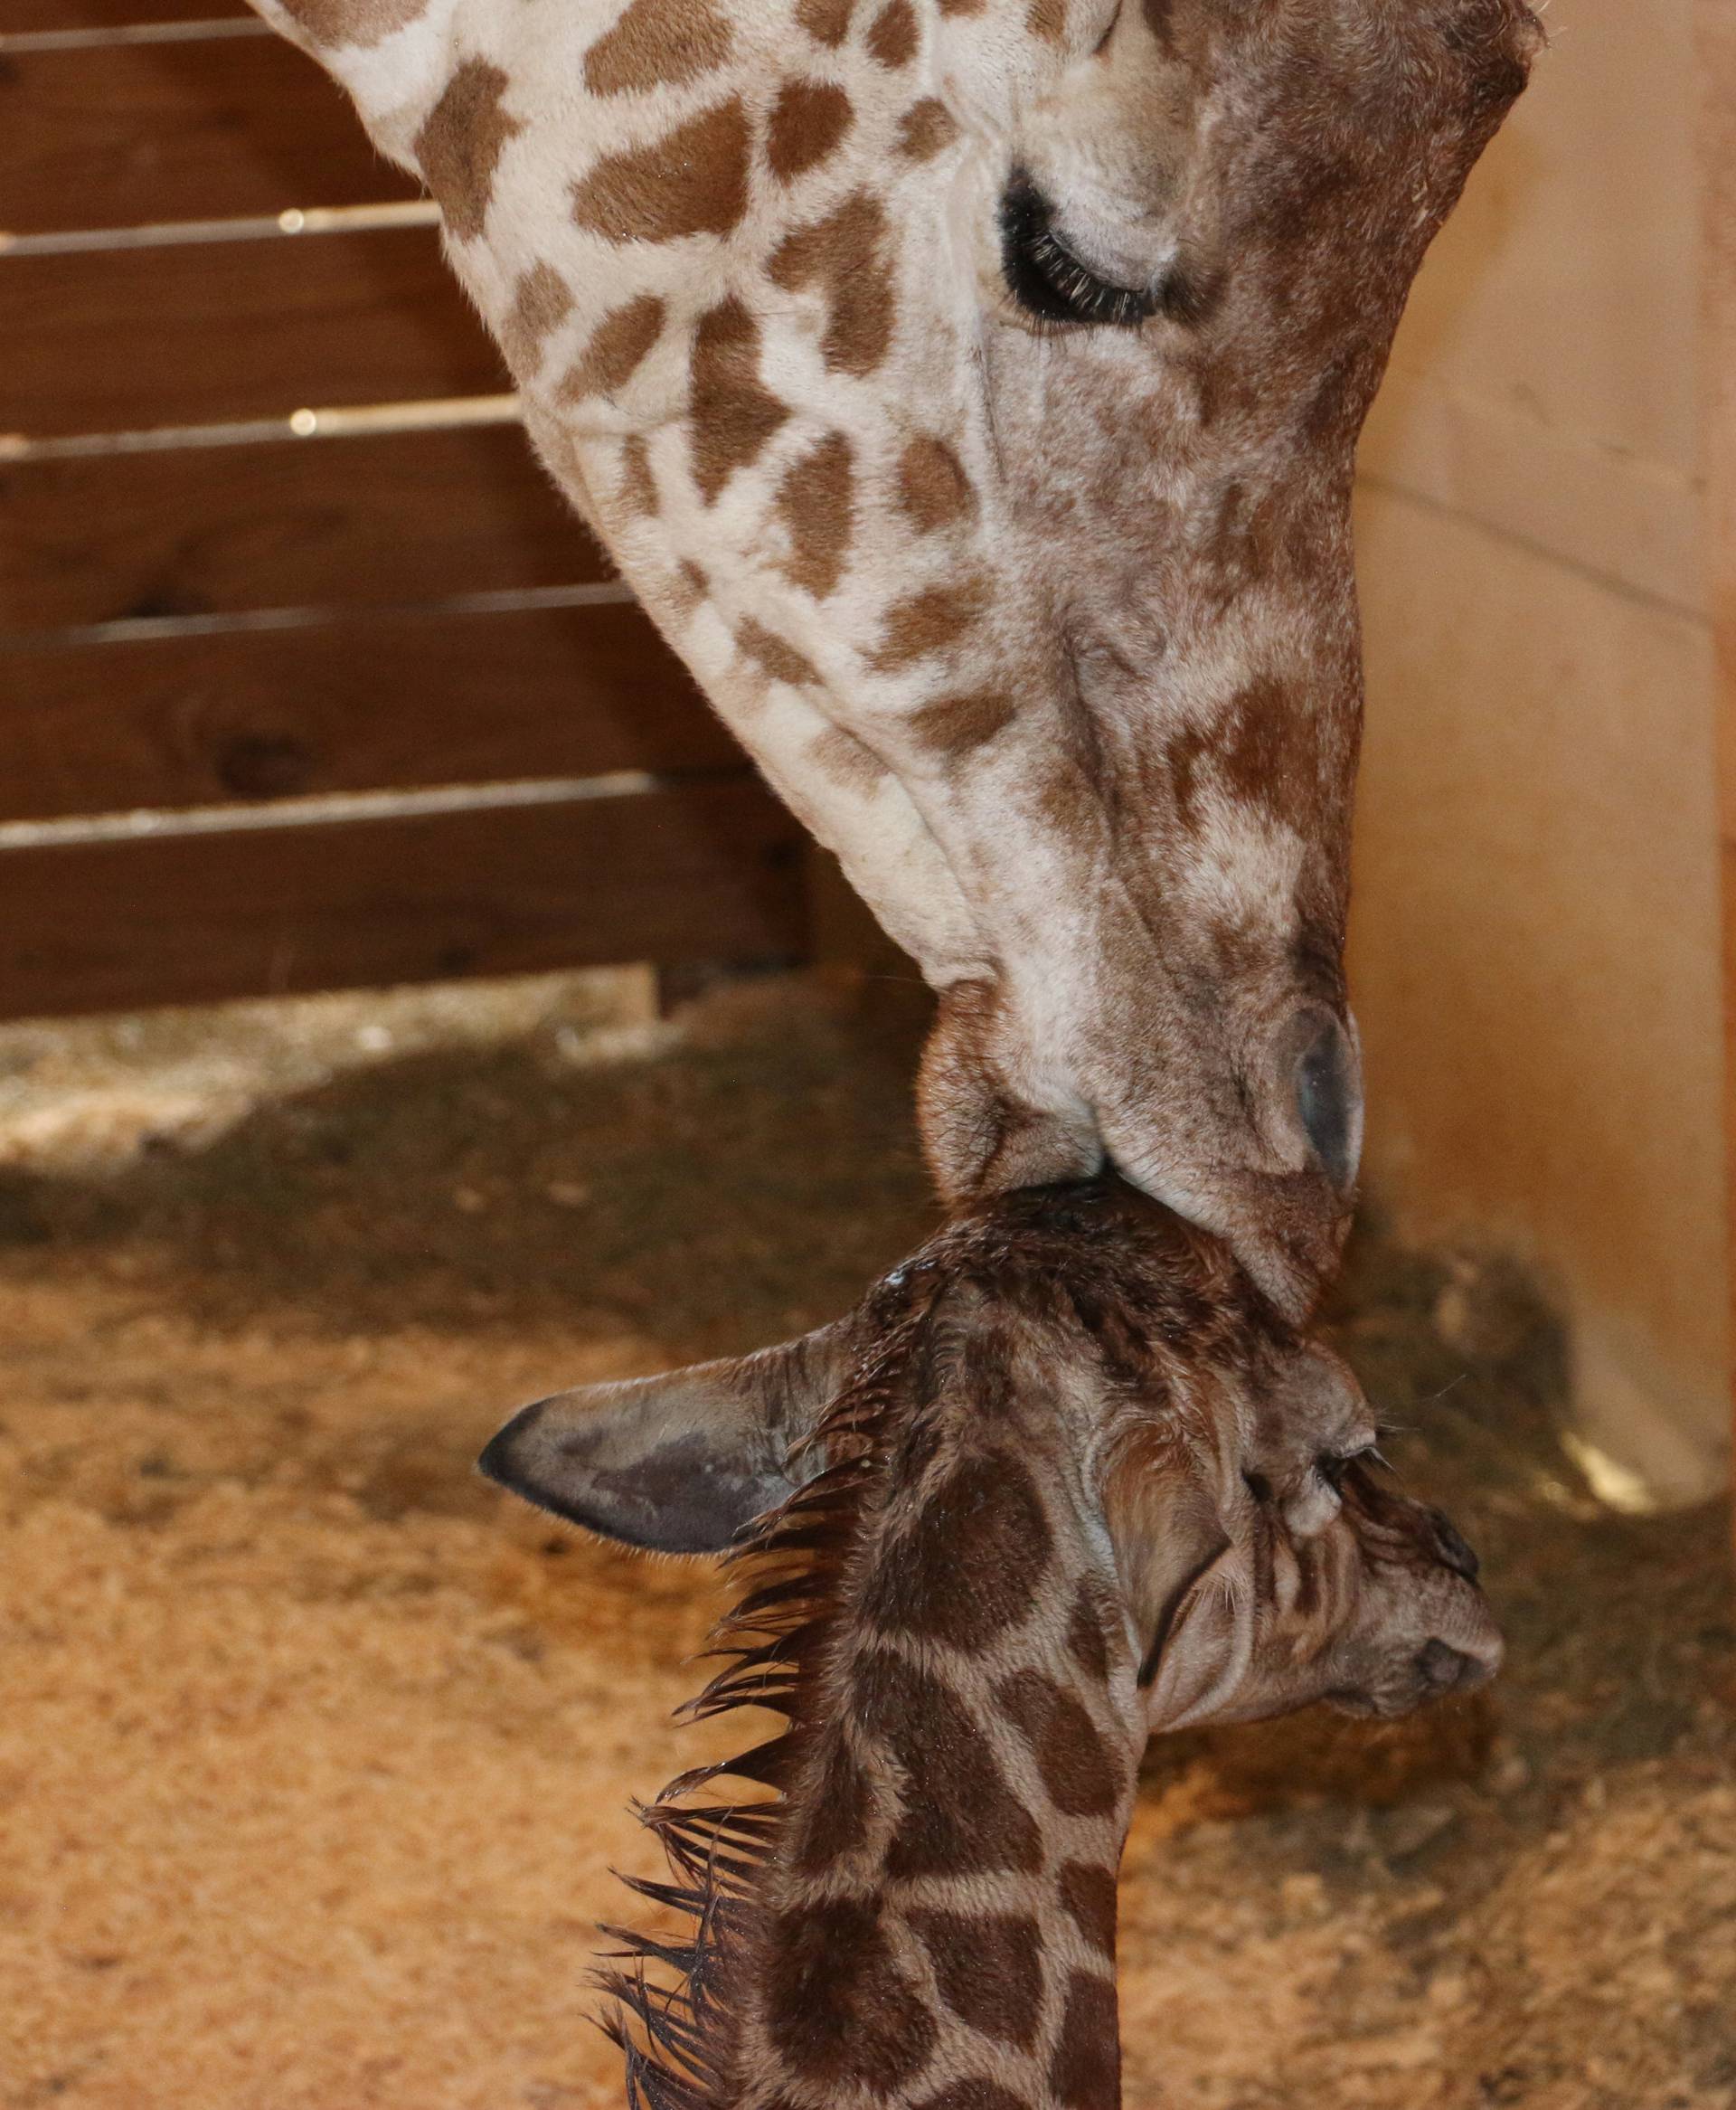 April comforts her newly born unamed baby giraffe at the Animal Adventure Park, in Harpursville